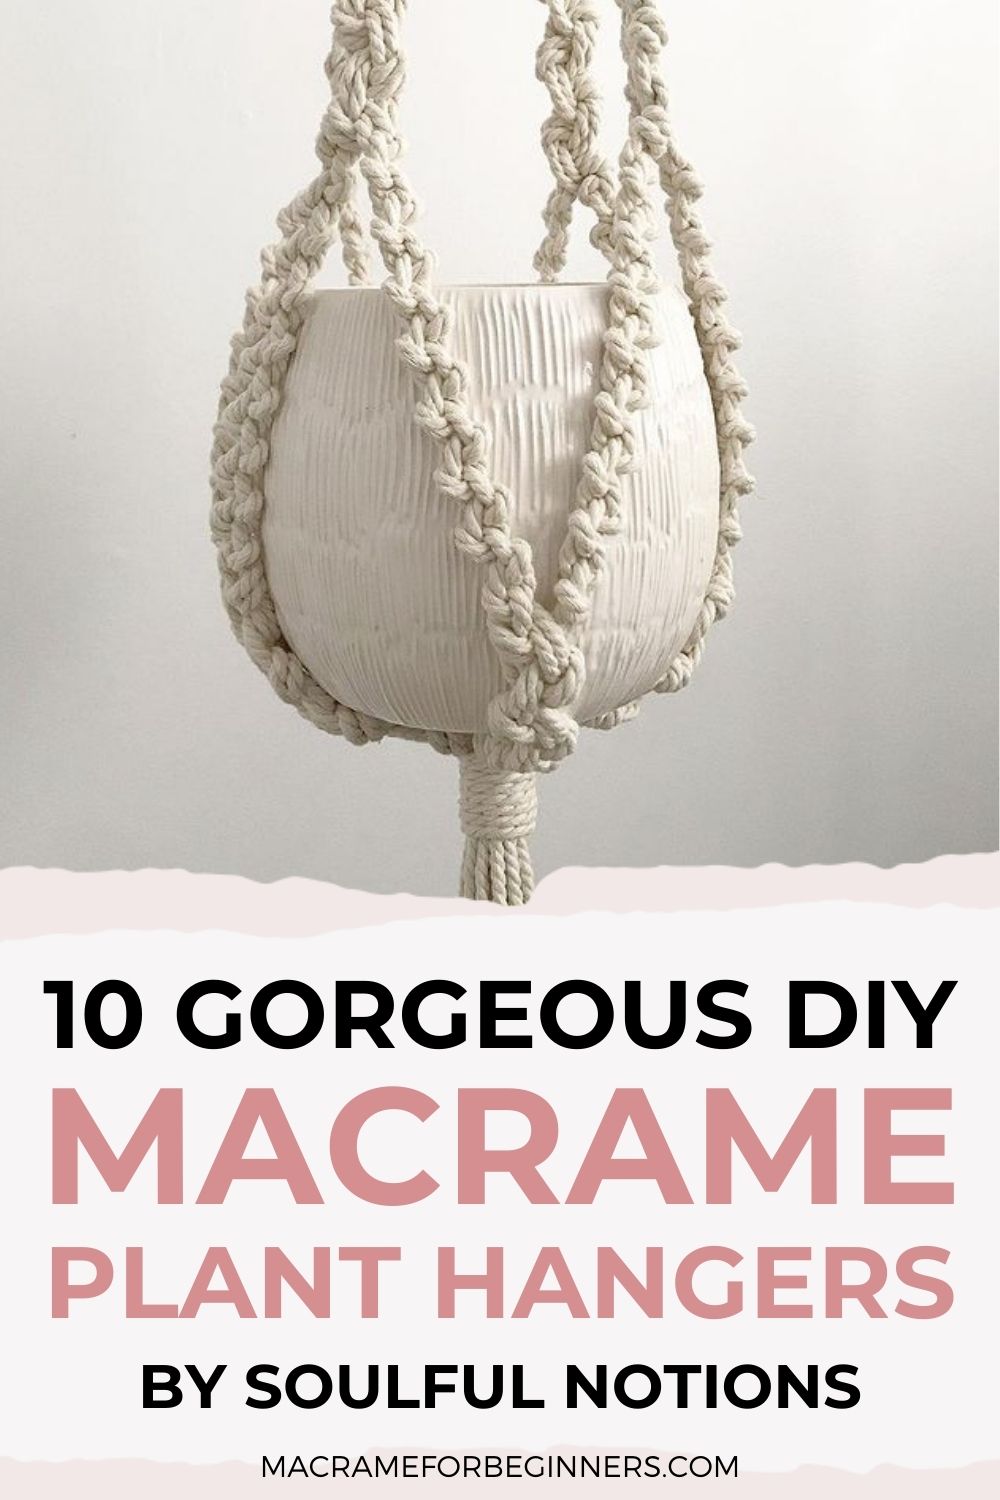 10 Gorgeous Easy Macrame Plant Hangers for Beginners by Soulful Notions - Macrame for Beginners 